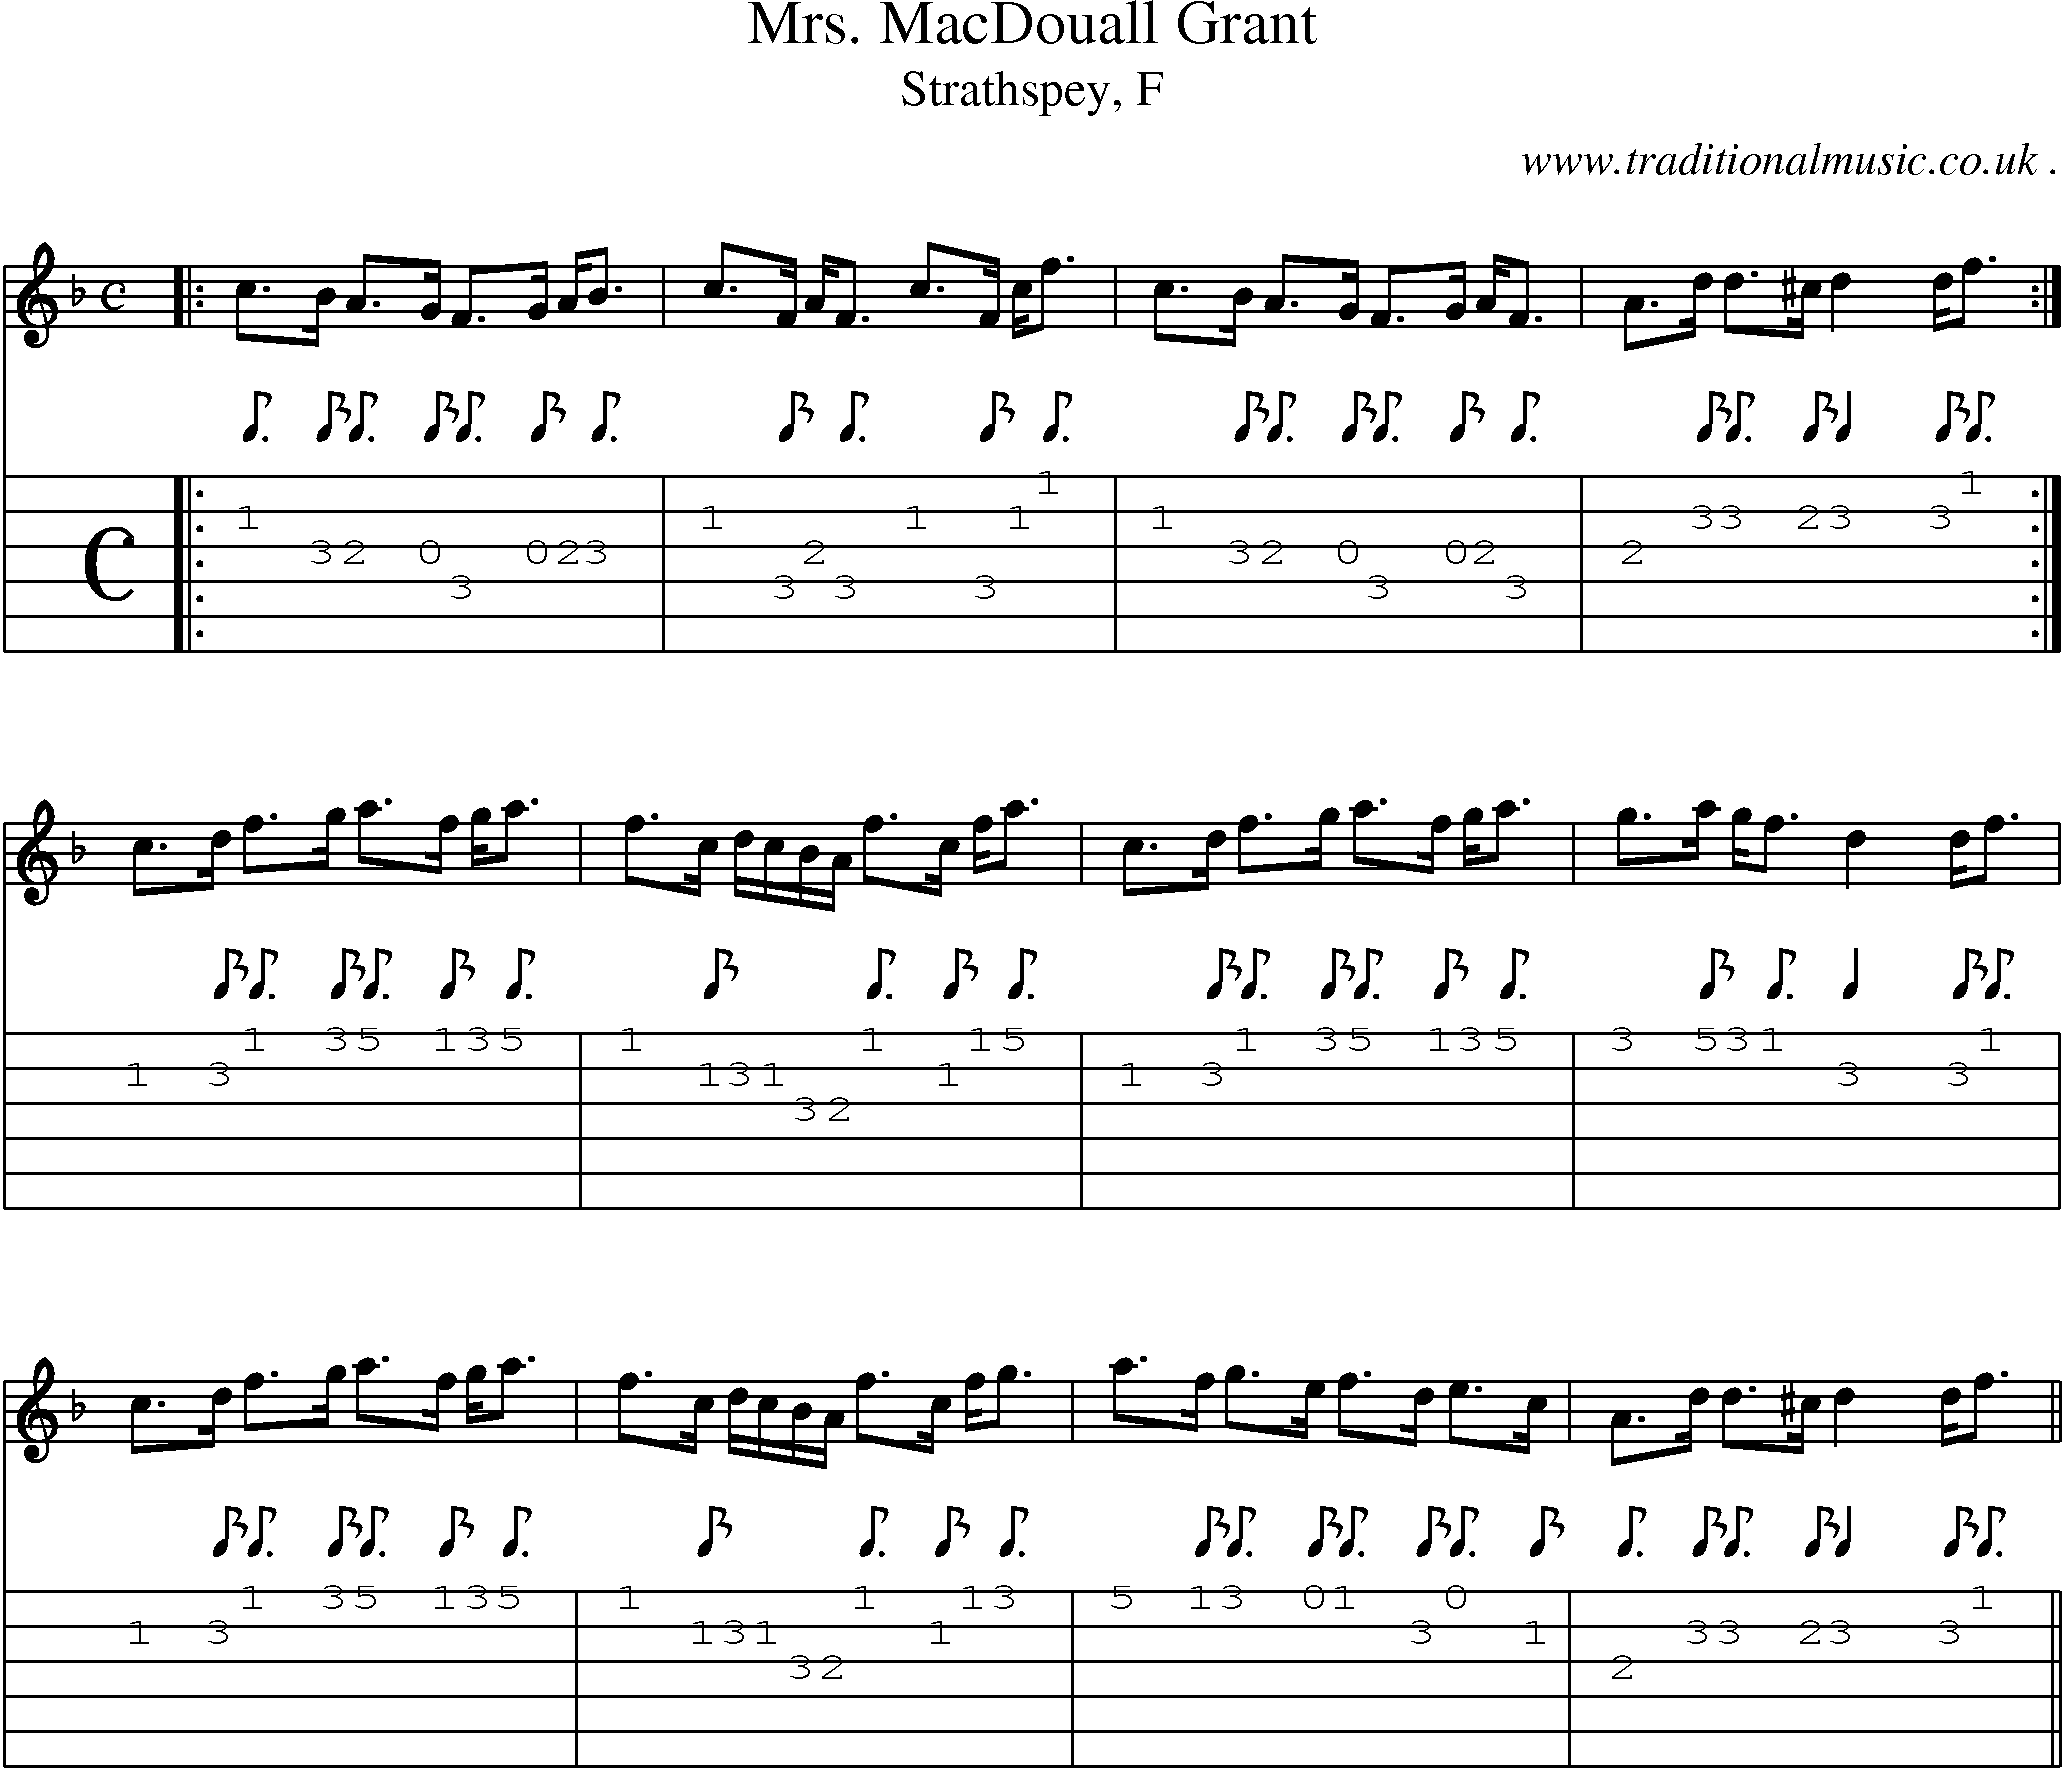 Sheet-music  score, Chords and Guitar Tabs for Mrs Macdouall Grant